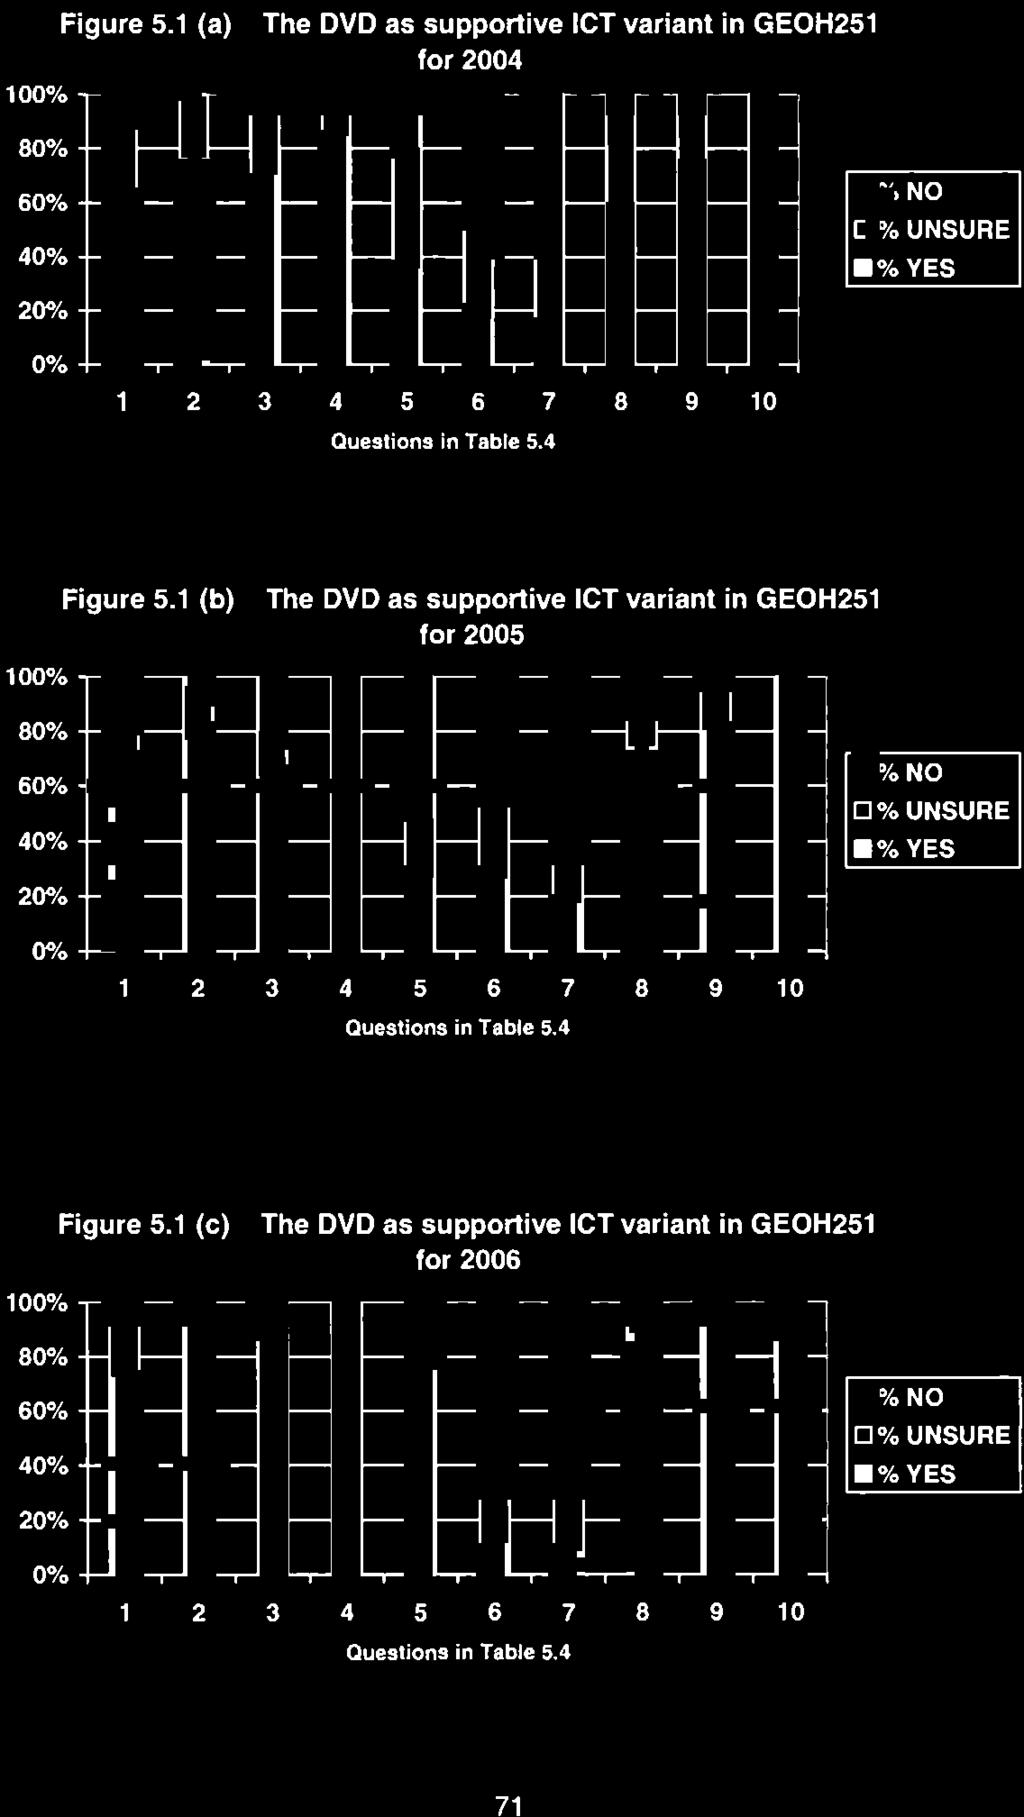 The DVD as supportive ICT variant in GEOH251 for